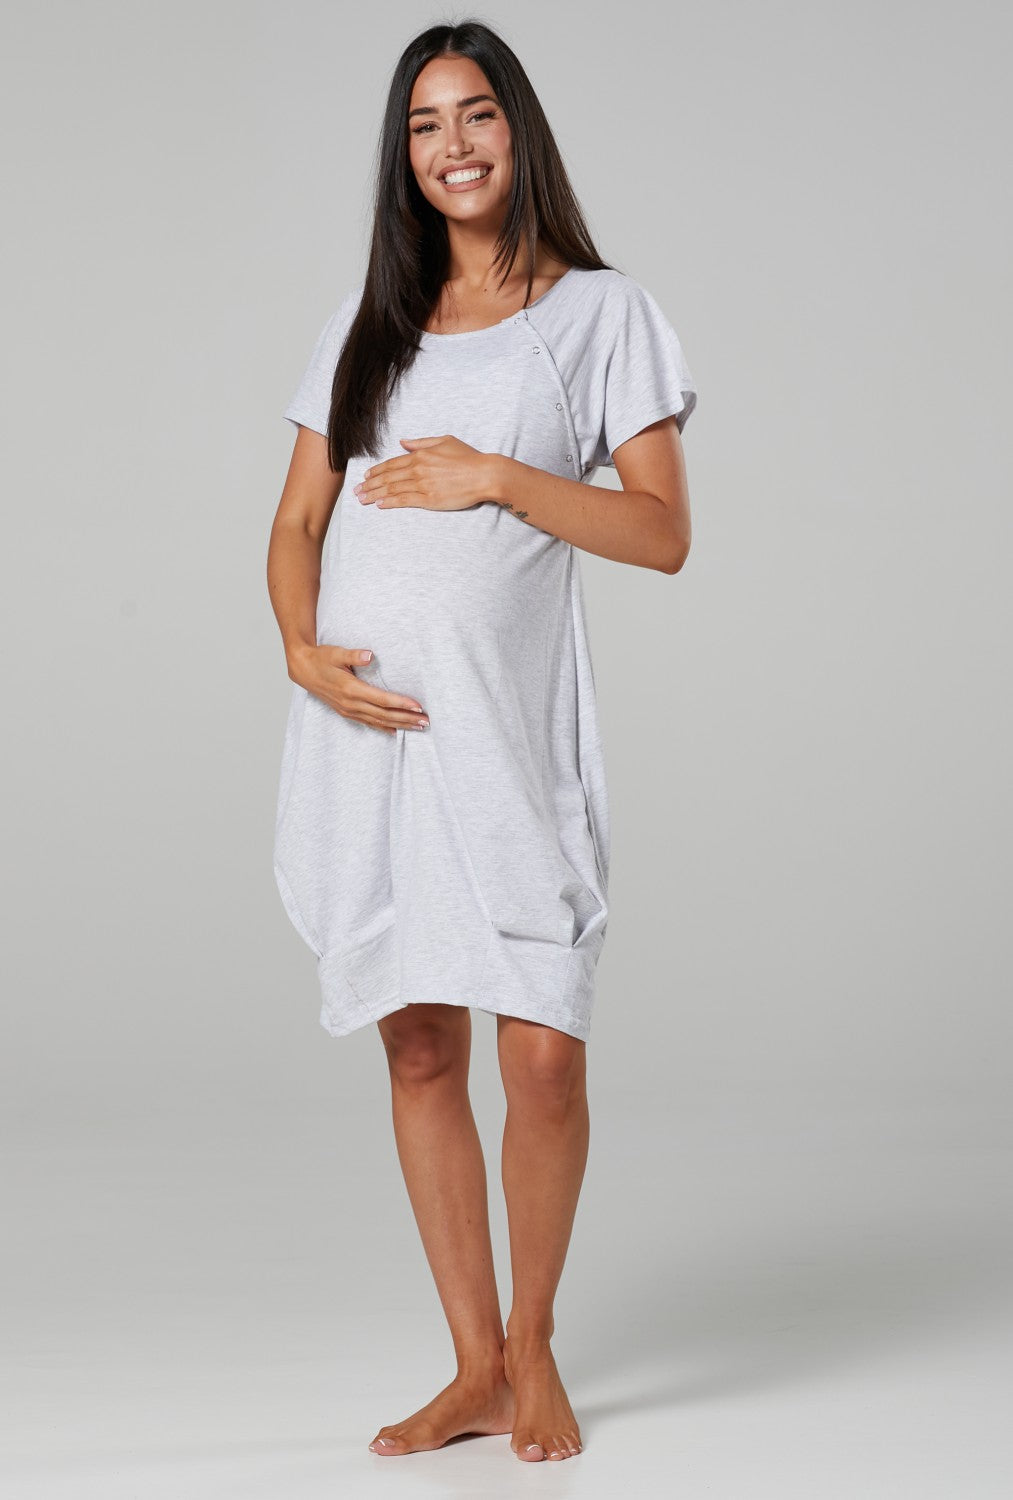 Best labour and delivery gowns | BabyCenter